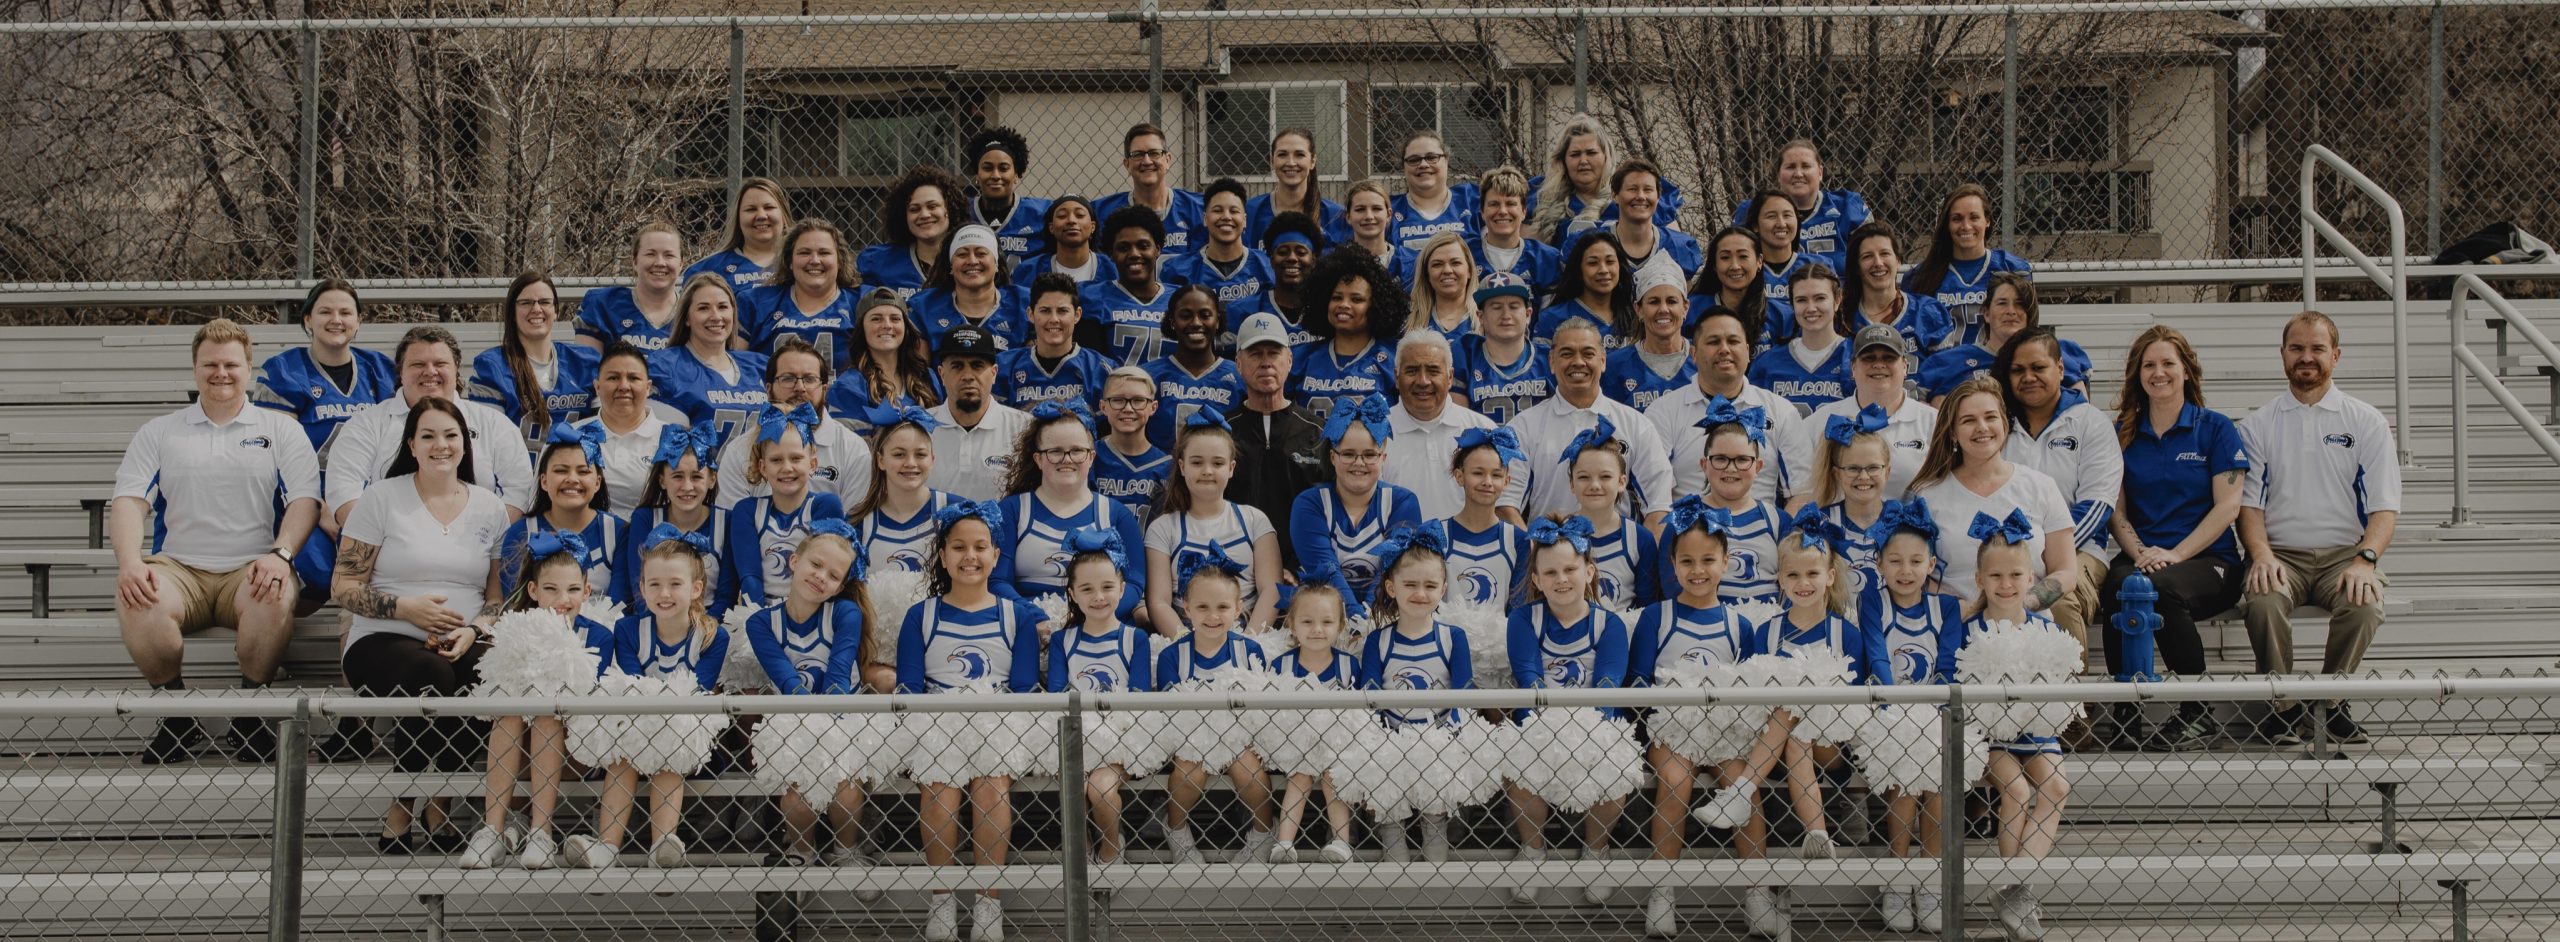 Women's National Football Conference WNFC We cheer for the Falconz at Cottonwood High School in the Spring. We are looking for cheerleaders for the Spring season. Please contact us if you have a child athlete interested in participating. We cheer at the home games only, but that is usually 3-4 games. In the future we would like to travel with our girls!